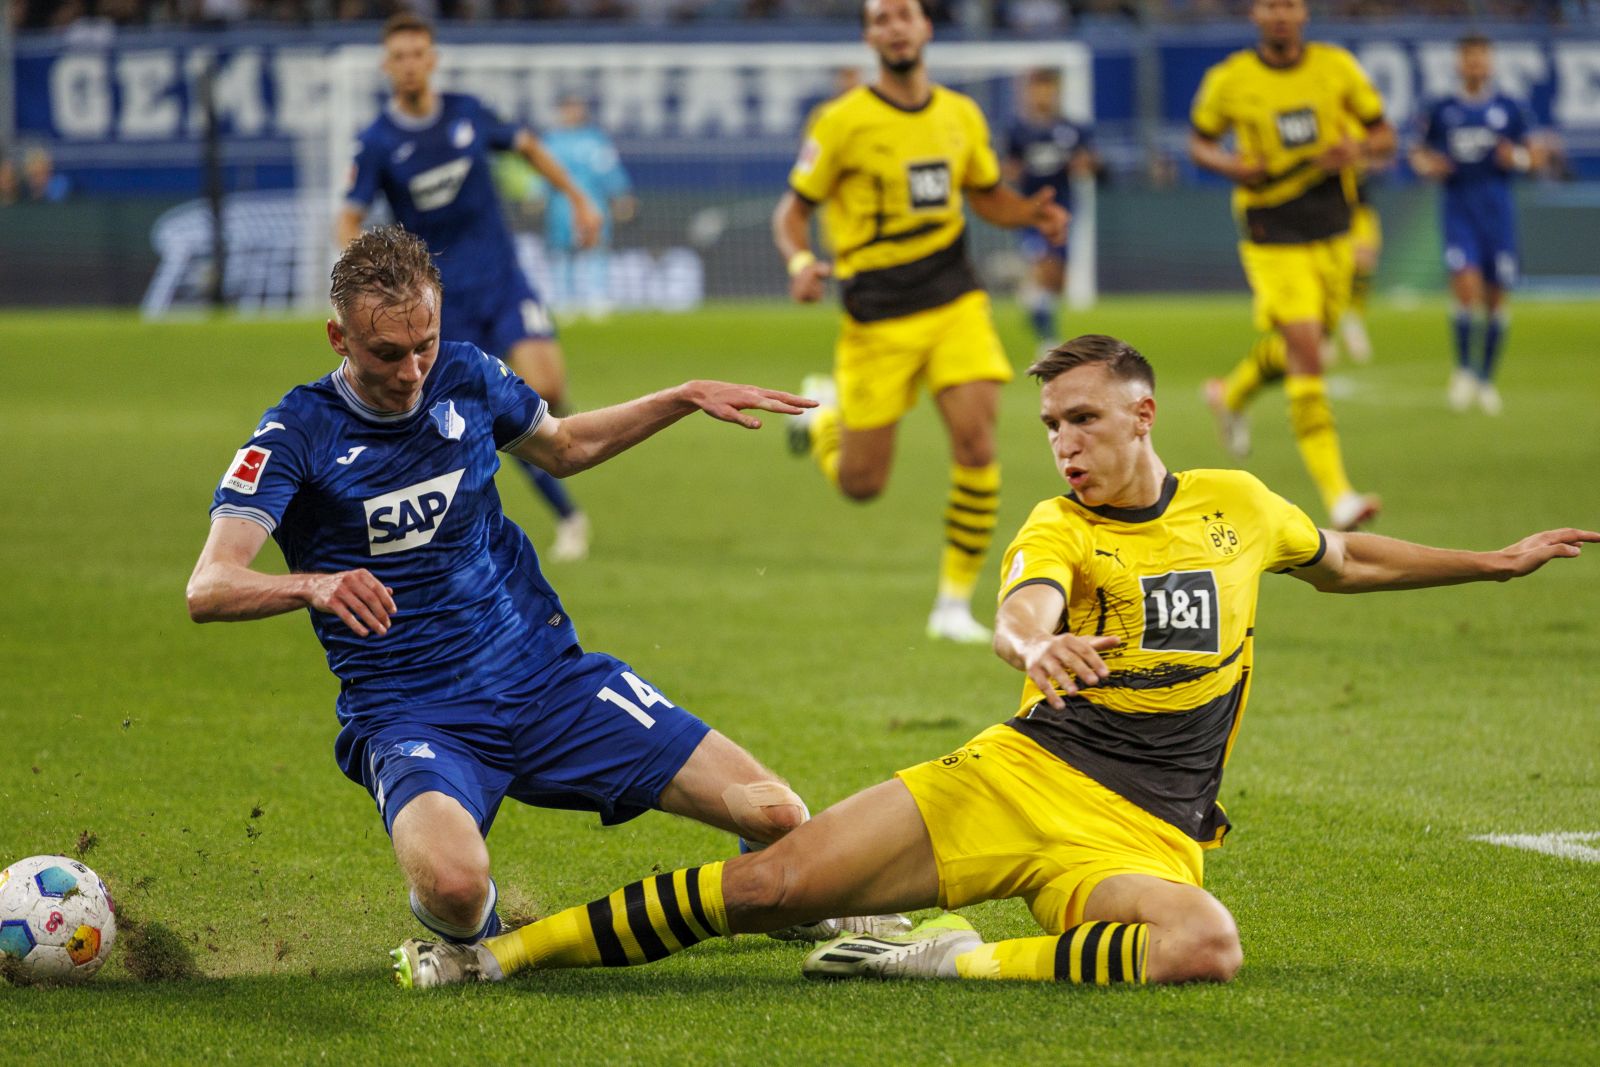 epa10890779 Hoffenheim's Maximilian Beier (L) in action against Dortmund's Nico Schlotterbeck (R) during the German Bundesliga soccer match between TSG 1899 Hoffenheim and Borussia Dortmund in Sinsheim, Germany, 29 September 2023.  EPA/CHRISTOPHER NEUNDORF CONDITIONS - ATTENTION: The DFL regulations prohibit any use of photographs as image sequences and/or quasi-video.